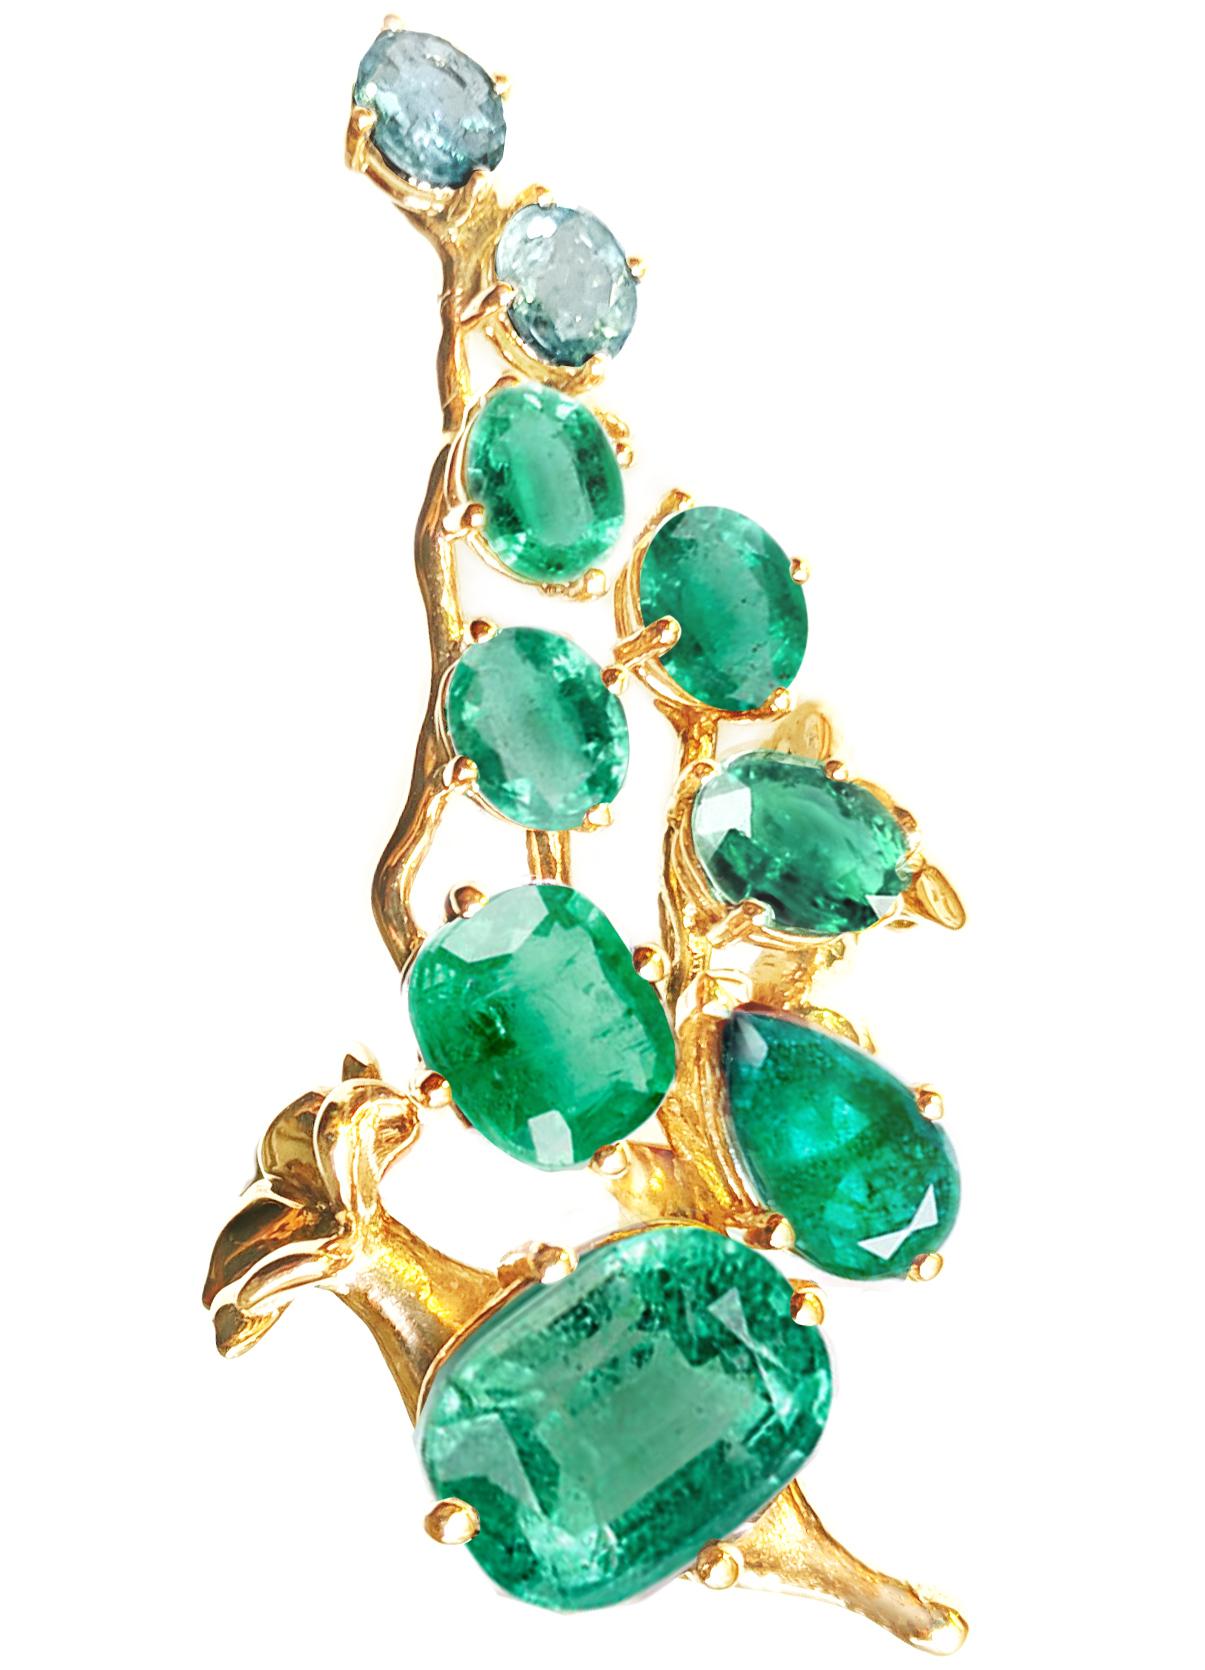 This Tobacco Flower contemporary floral cocktail ring is made of 18 karat yellow gold. The natural gems in this piece include a cushion cut emerald of 3.48 carats (10.5x9 mm) and another of 1.37 carats (8.4x6 mm), a pear cut emerald of 0.98 carats